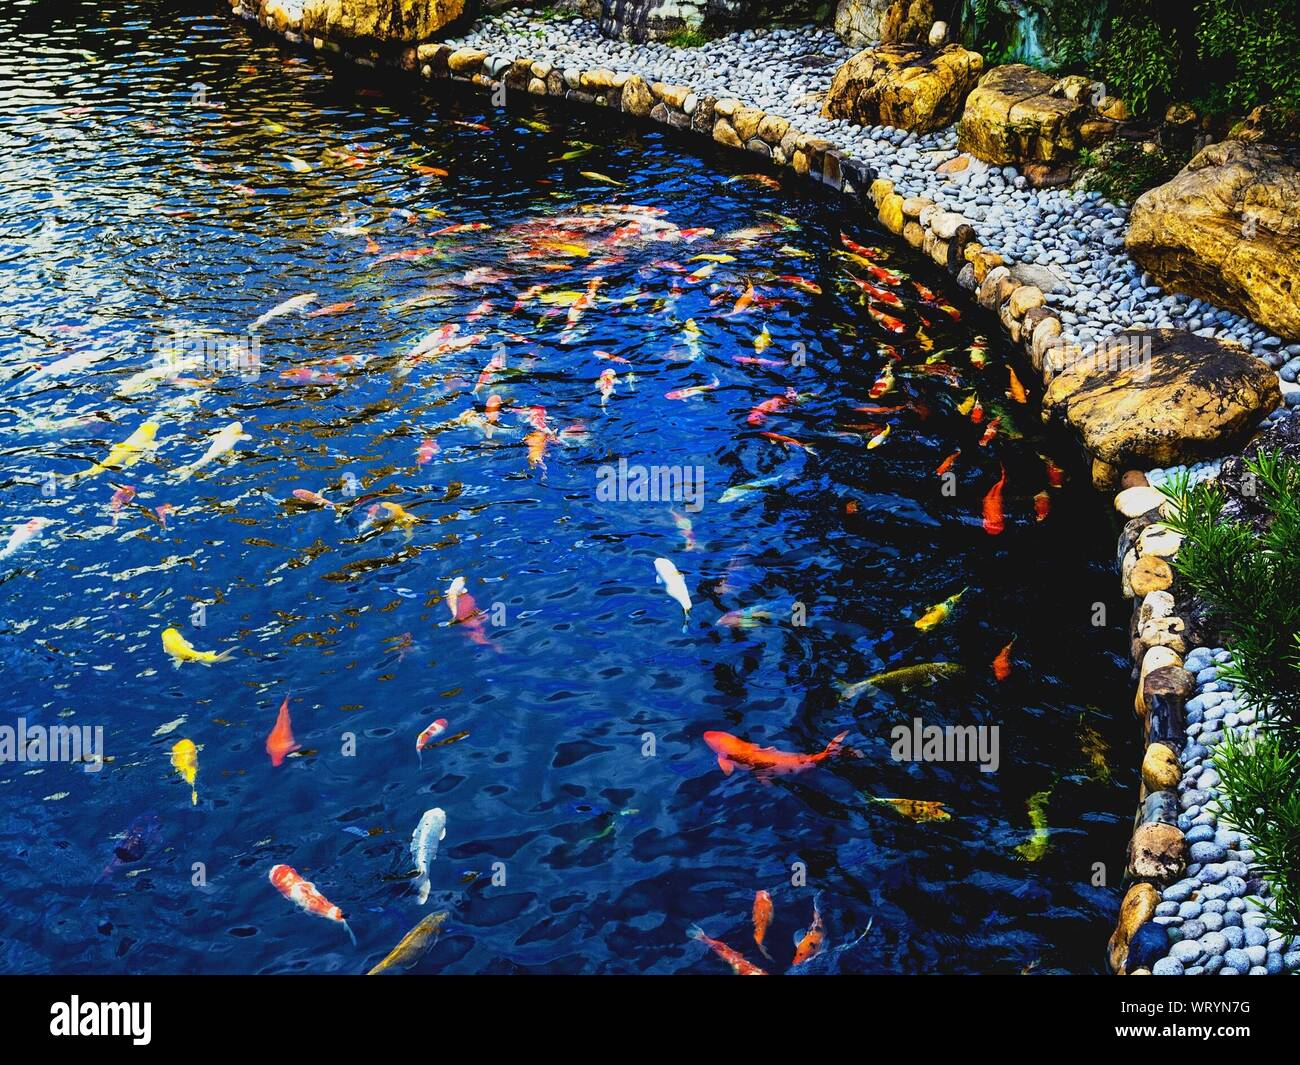 High Angle View Of Koi Carbs Swimming In Pond Stock Photo